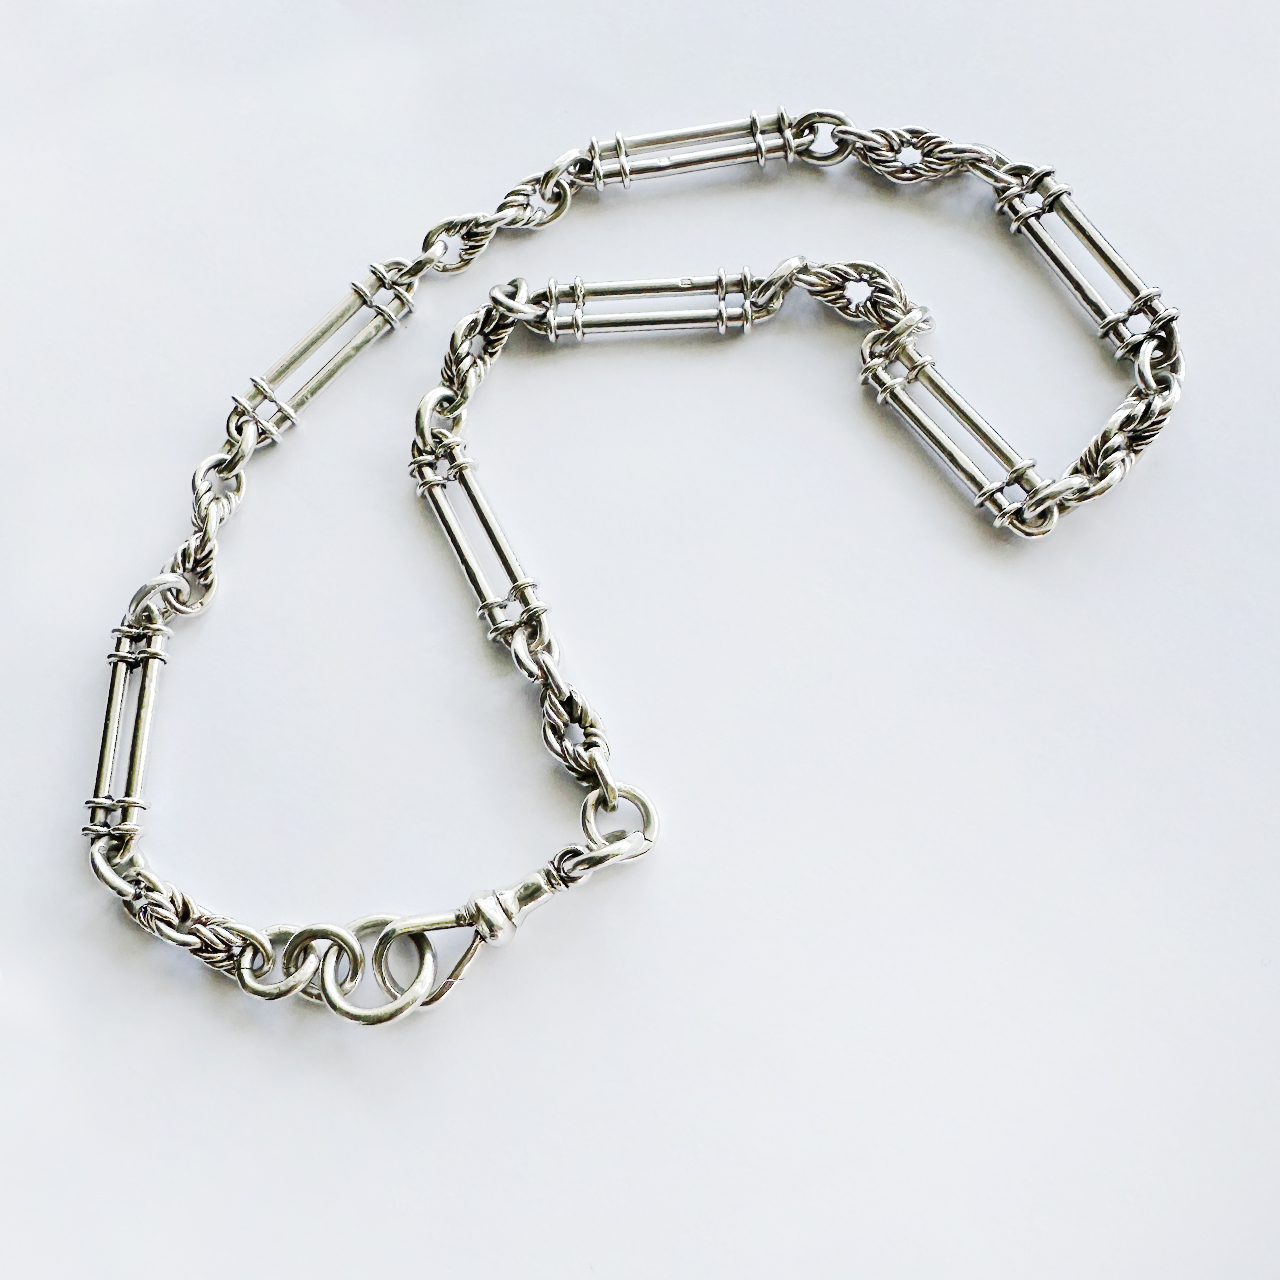 Unique Fancy Silver Albert Antique Trombone Chain. The trombone links are 3cm long, each hallmarked with the the sterling lion and the securing dog clip has the hallmark for Birmingham 1907. Each trombone link has fetter link spacers and the total length of the chain is 18 inches. A beautiful Edwardian trombone link Albert chain.